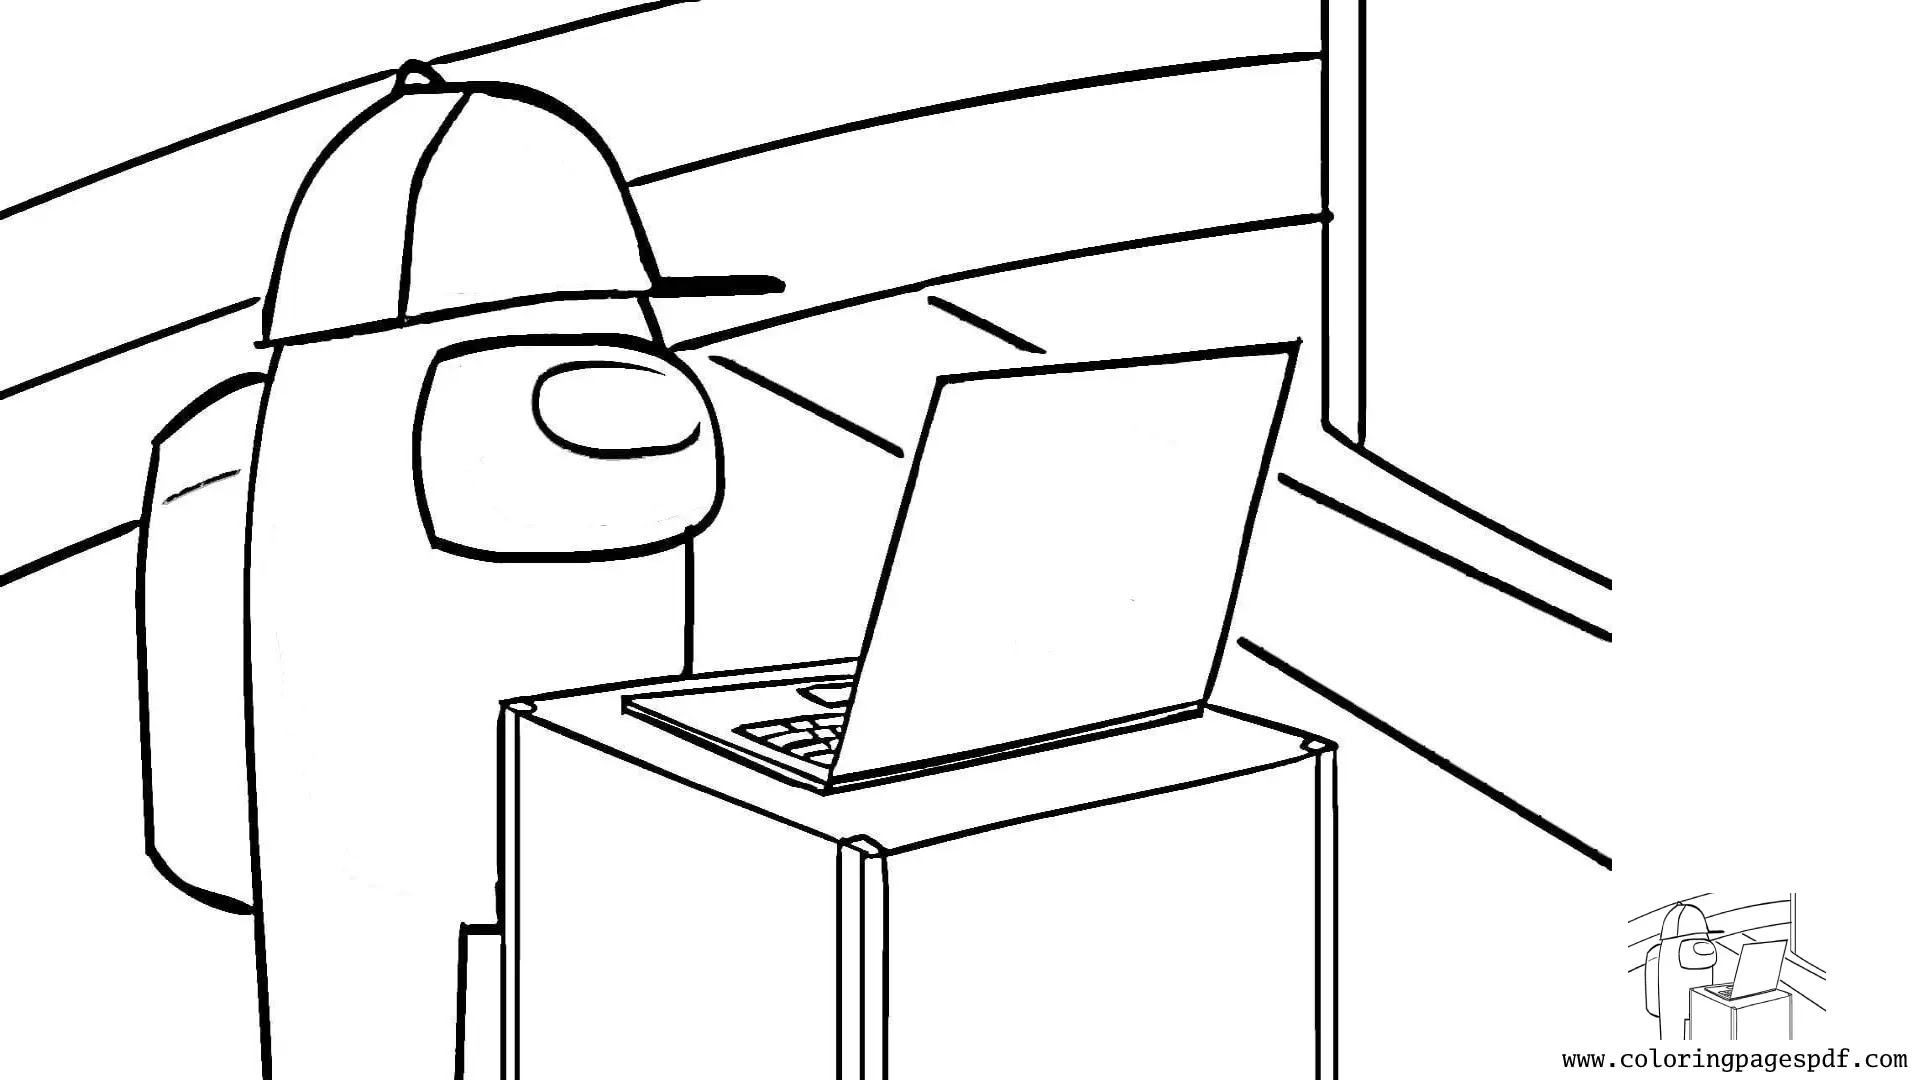 Coloring Page Of A Crewmate In Front Of A Laptop